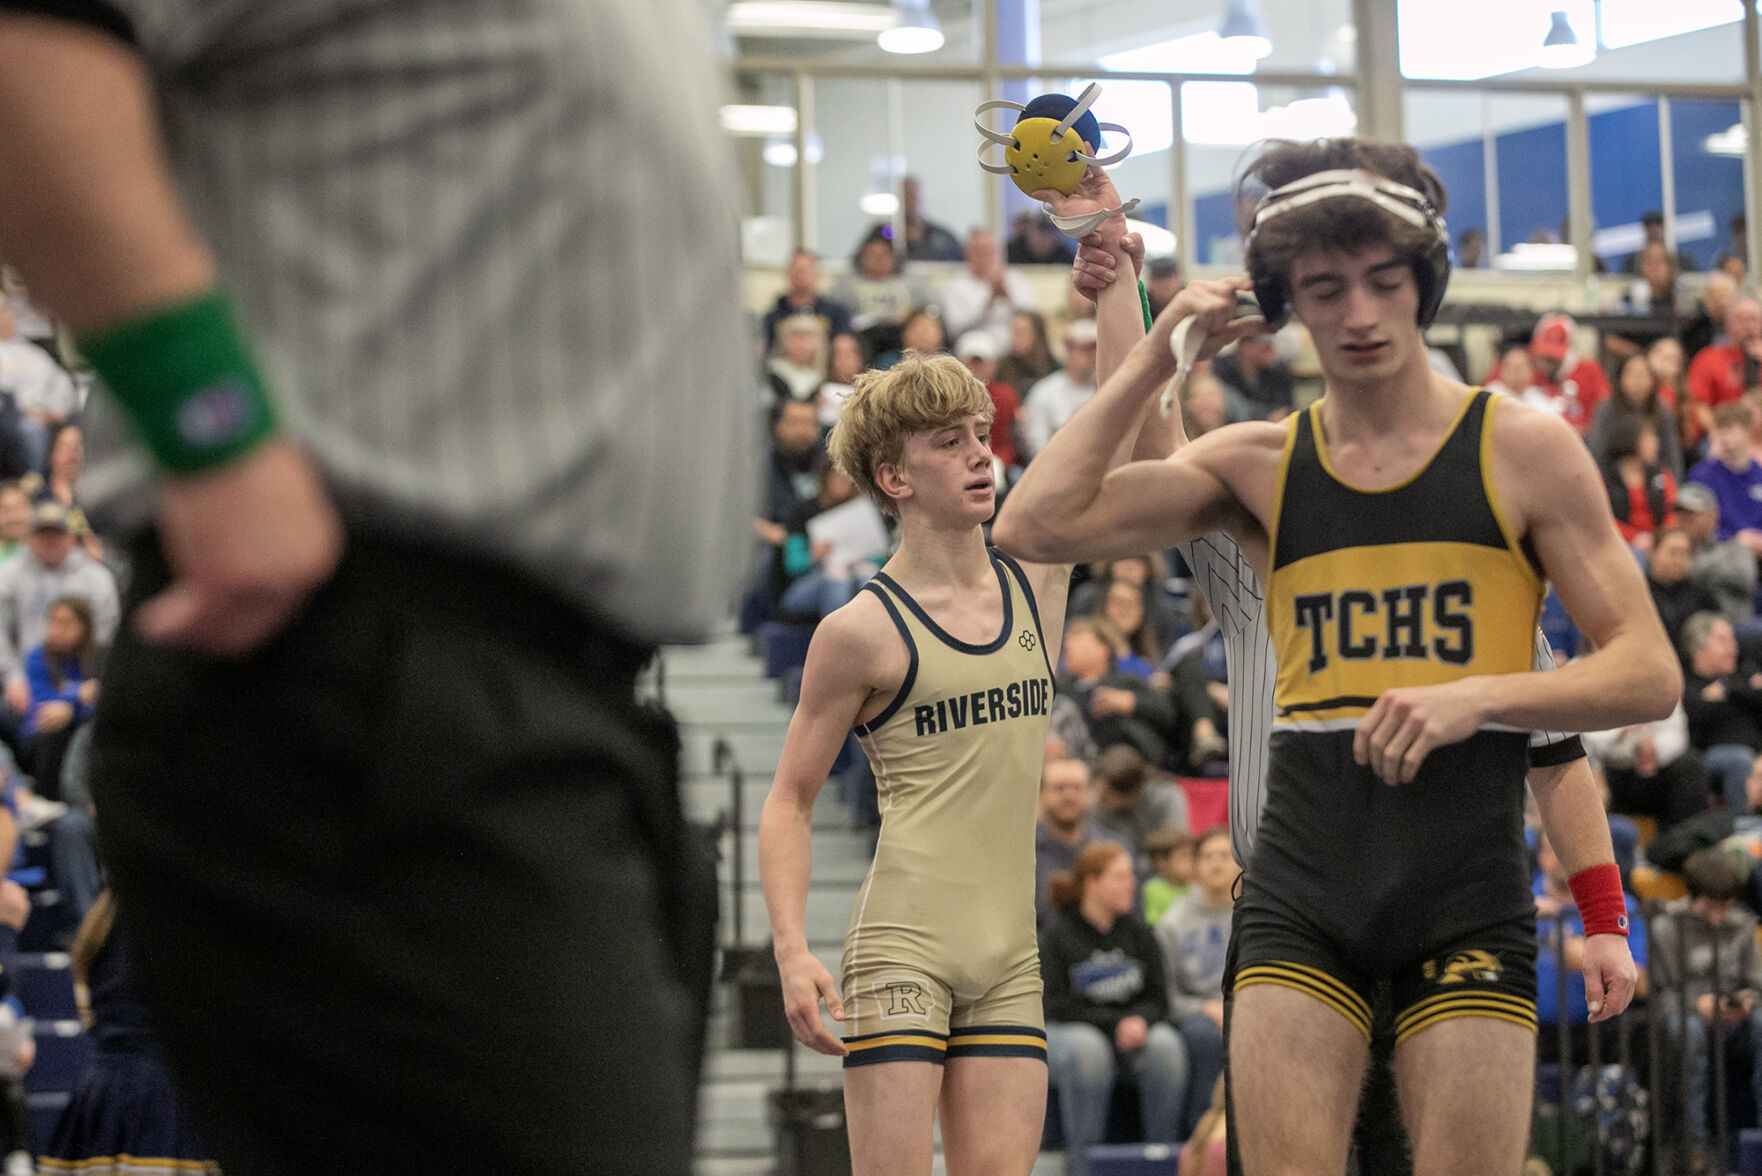 PHOTOS & VIDEO Championship matches from the Class 1A District 8